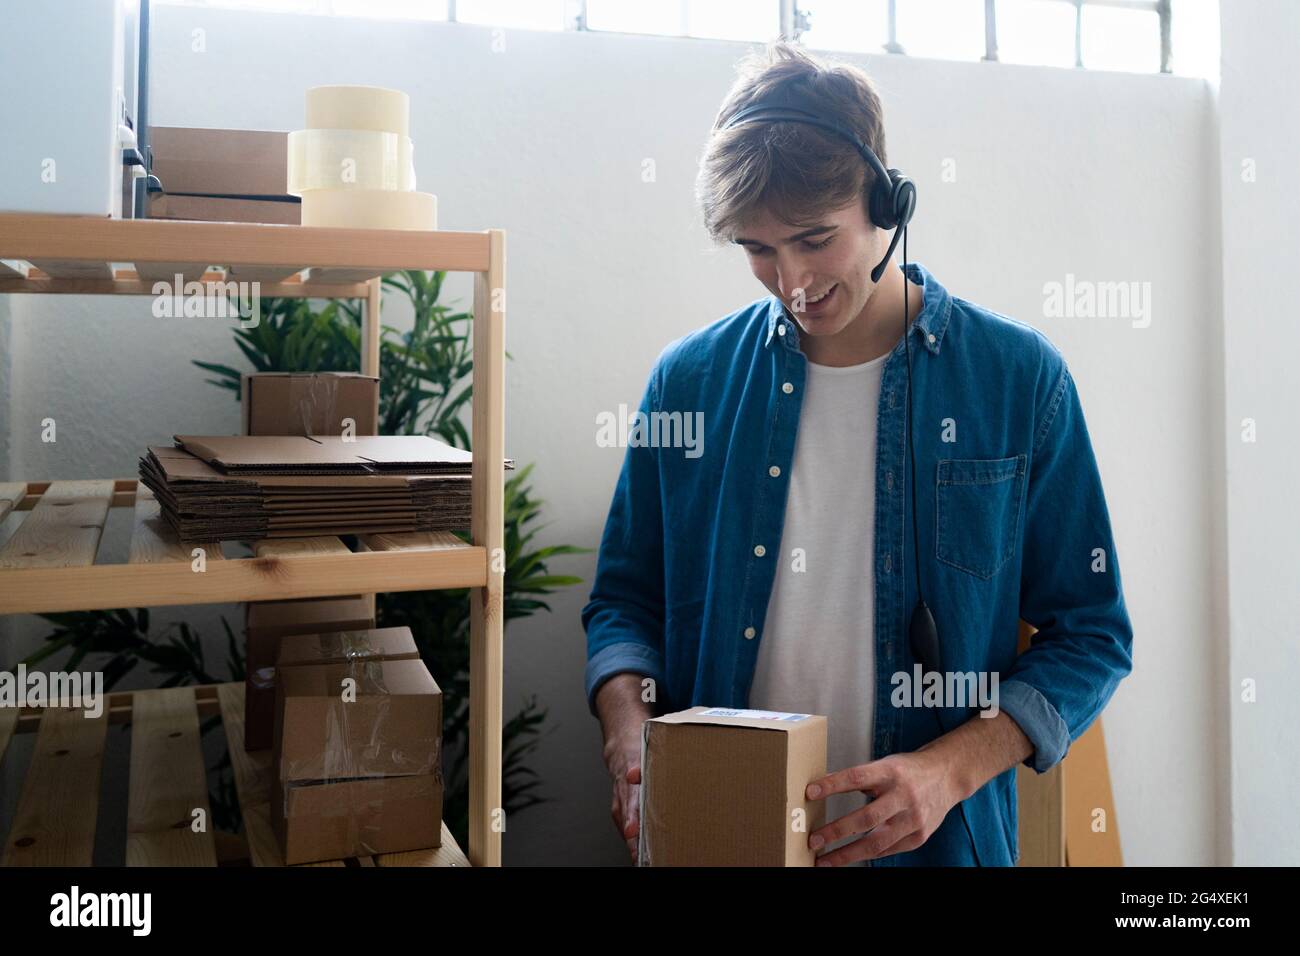 Smiling male customer service representative looking at box by rack in warehouse Stock Photo